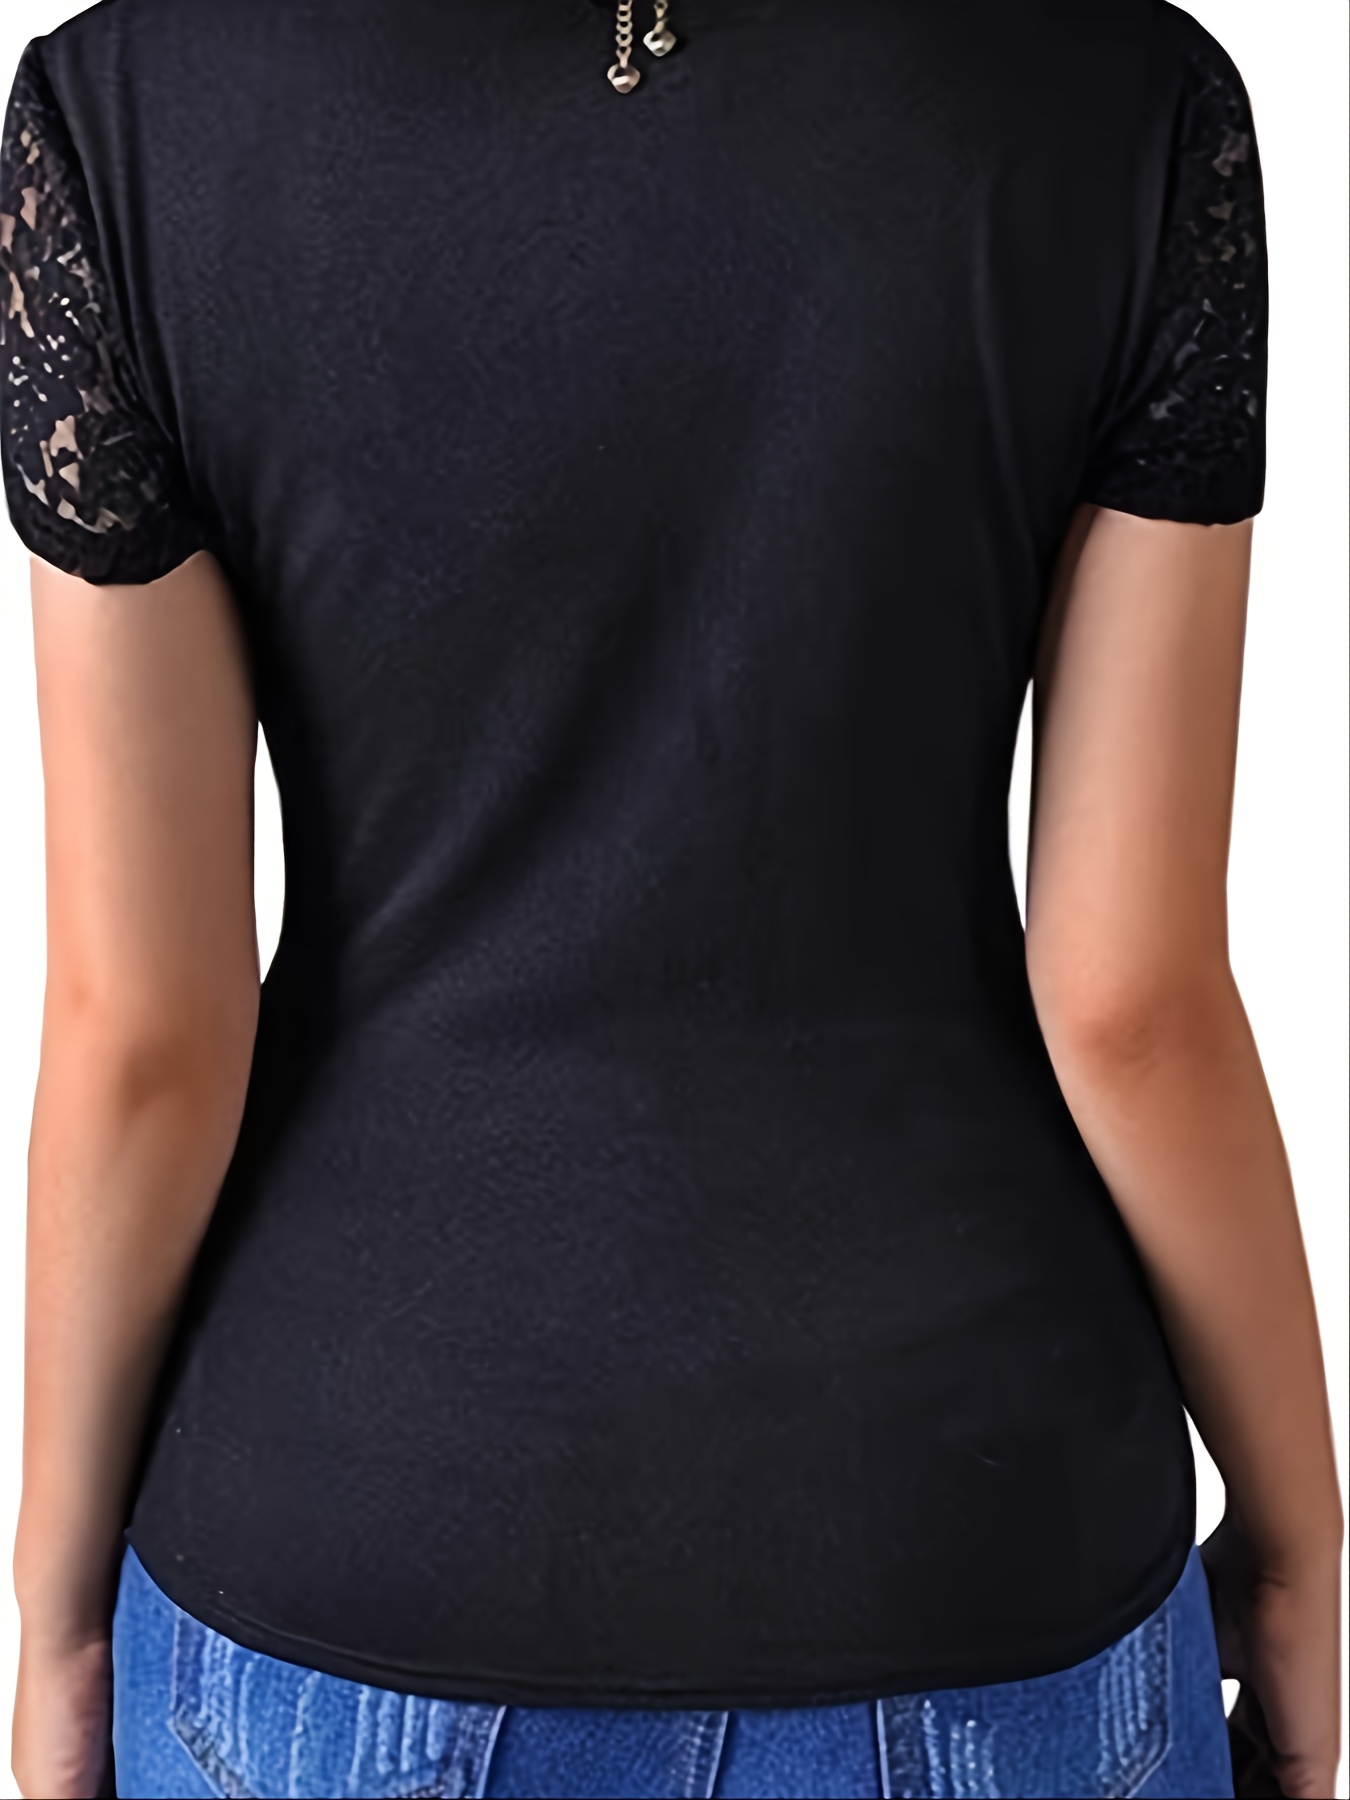 Black Unisex Lace N Loop T-shirts Small